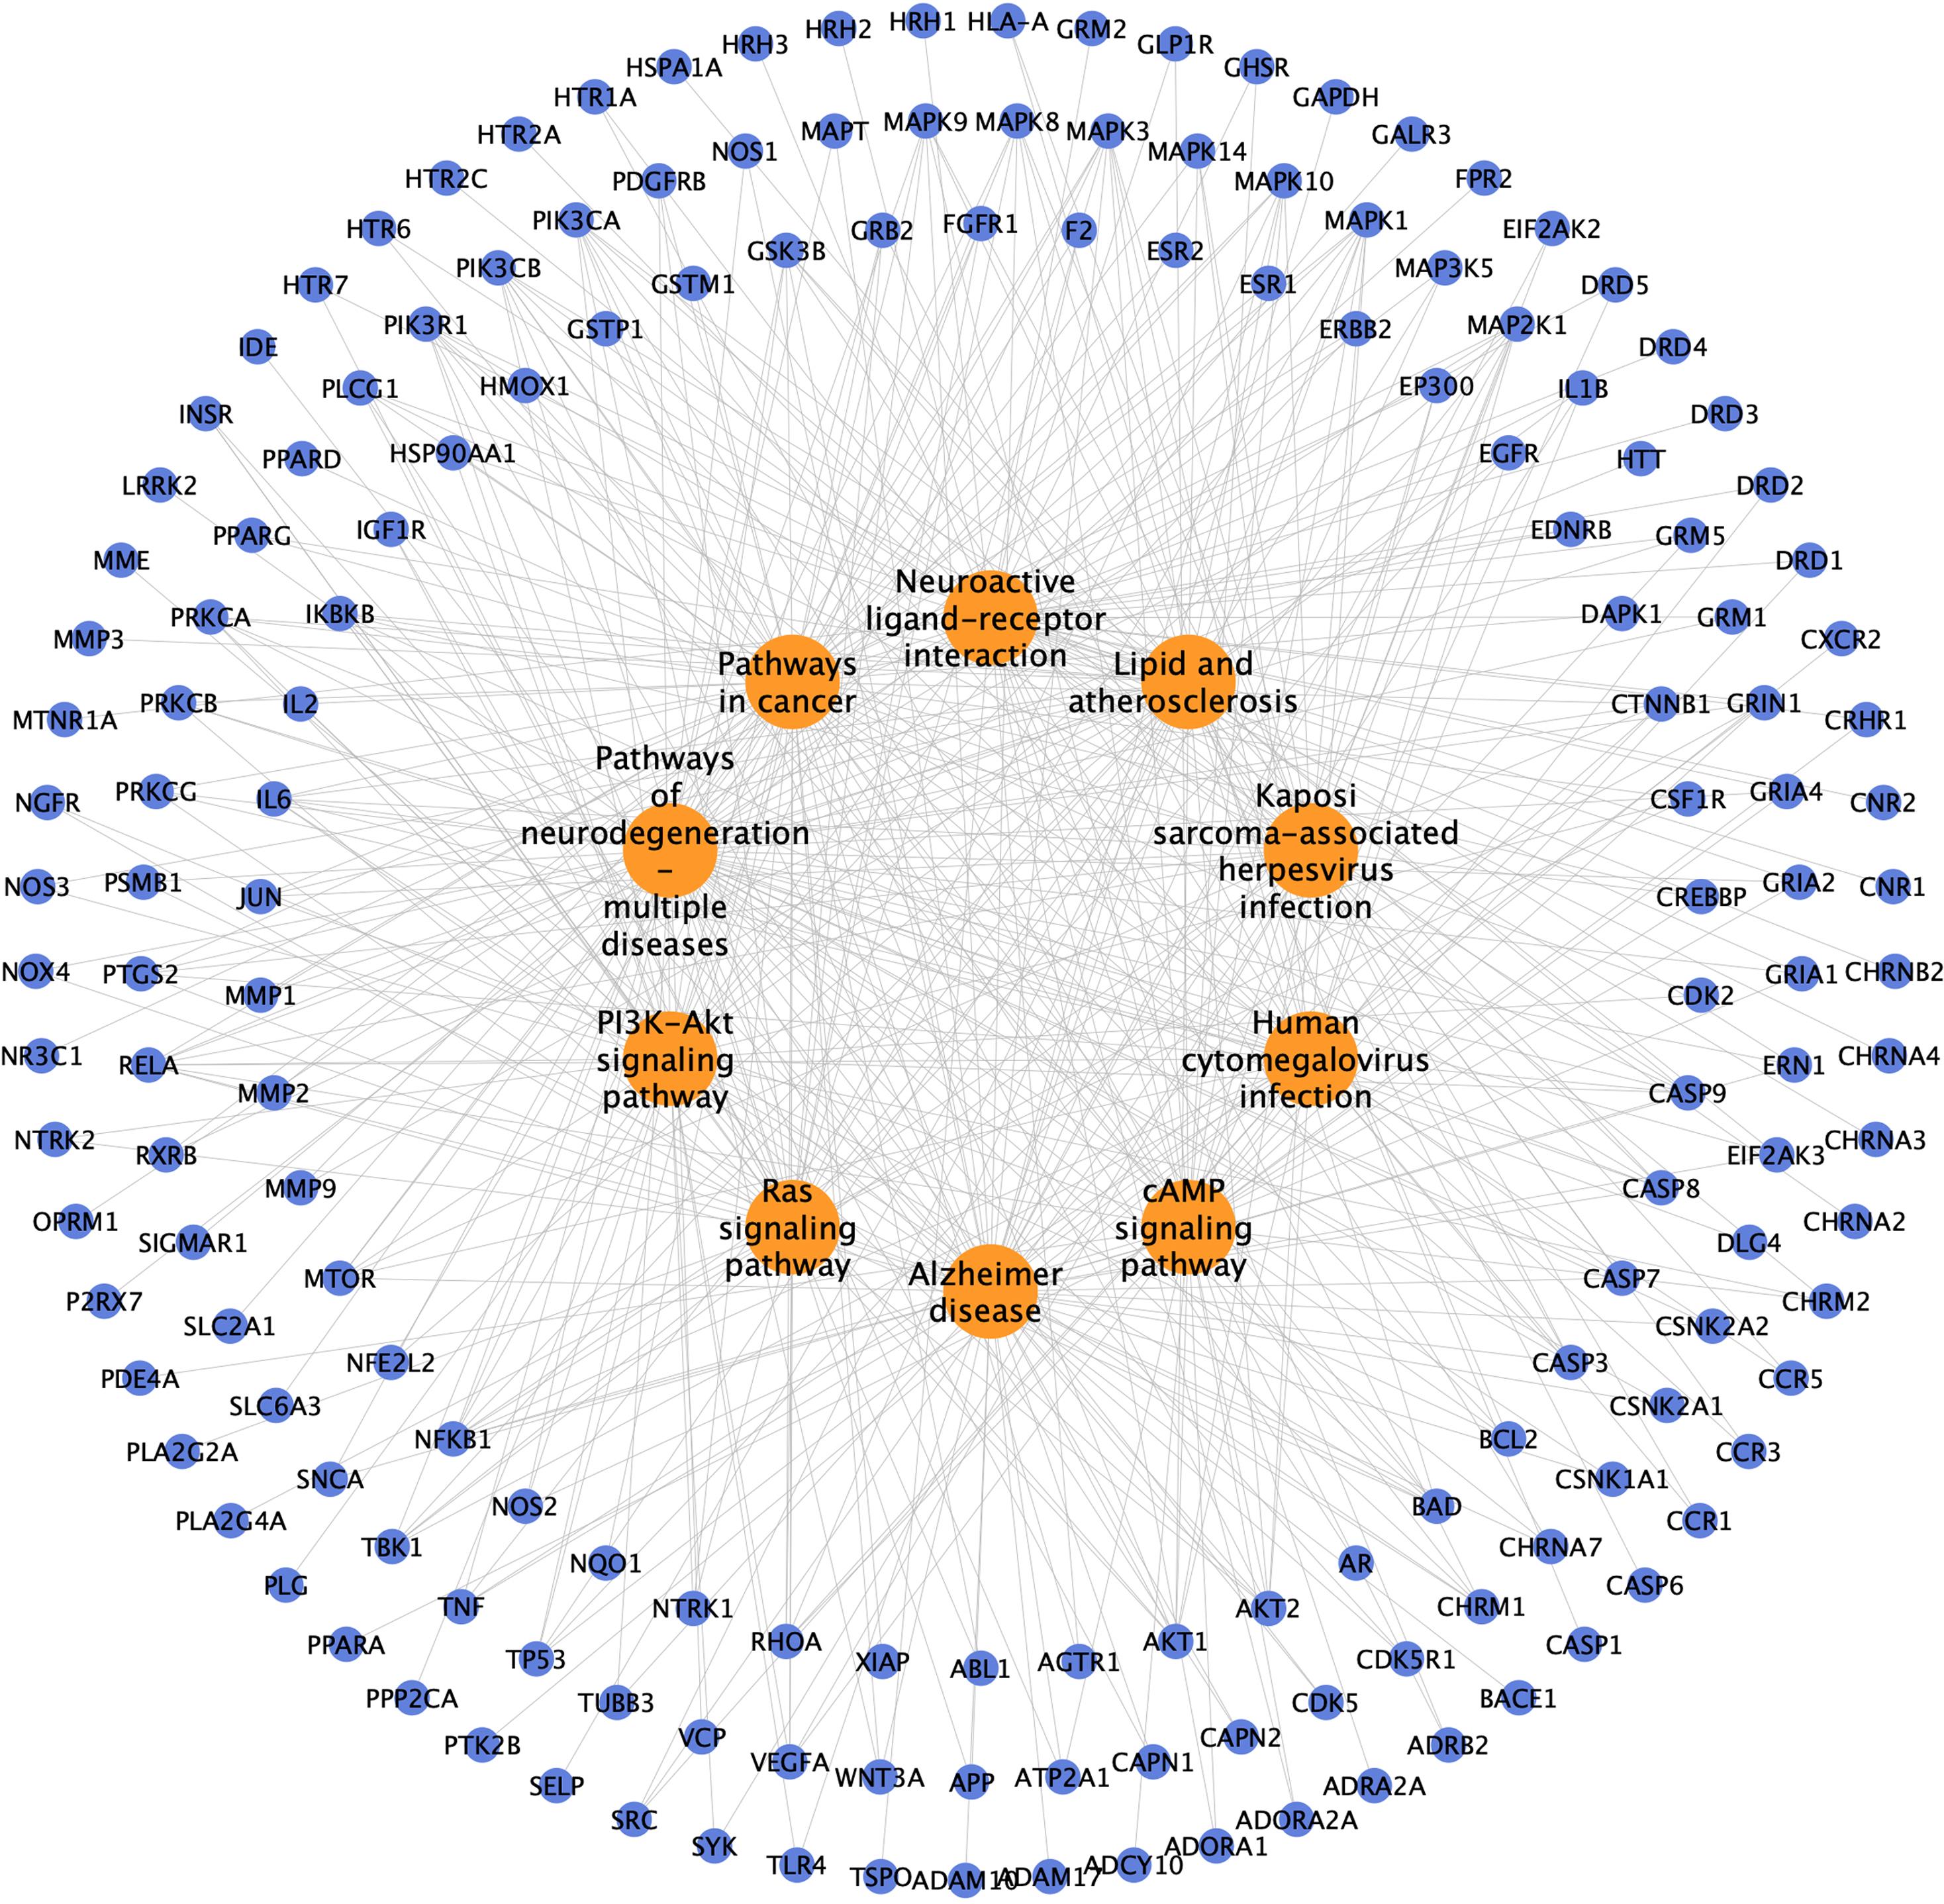 The pathway-target network. Orange circles indicate pathways involved by potential targets, blue circles are targets, and gray lines indicate their connections.